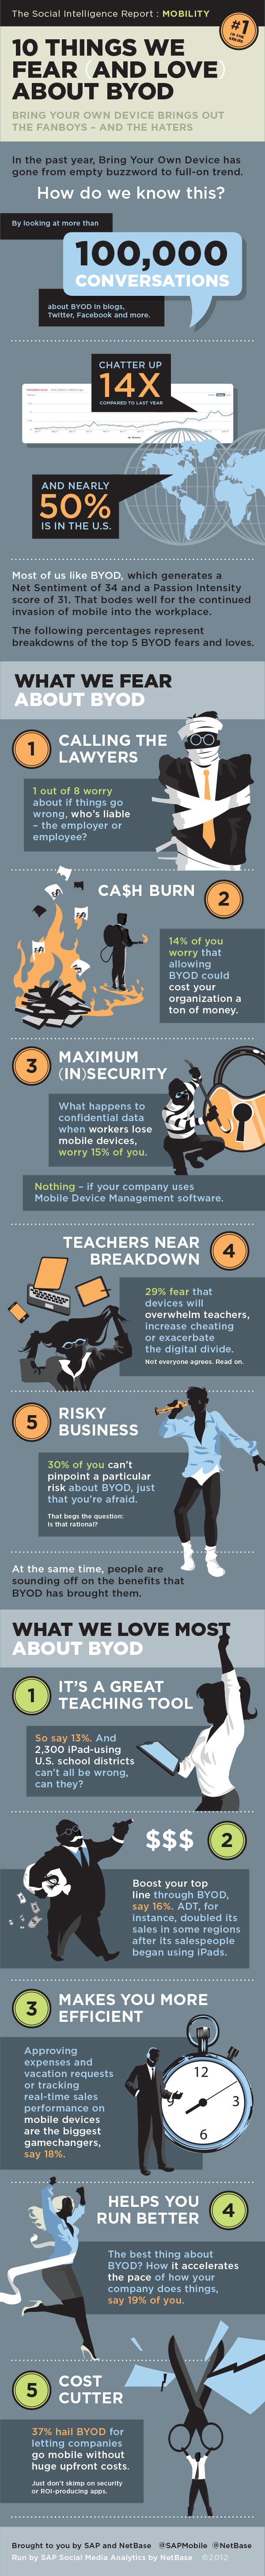 SAP NetBase BYOD Top Fears Loves Infographic R3